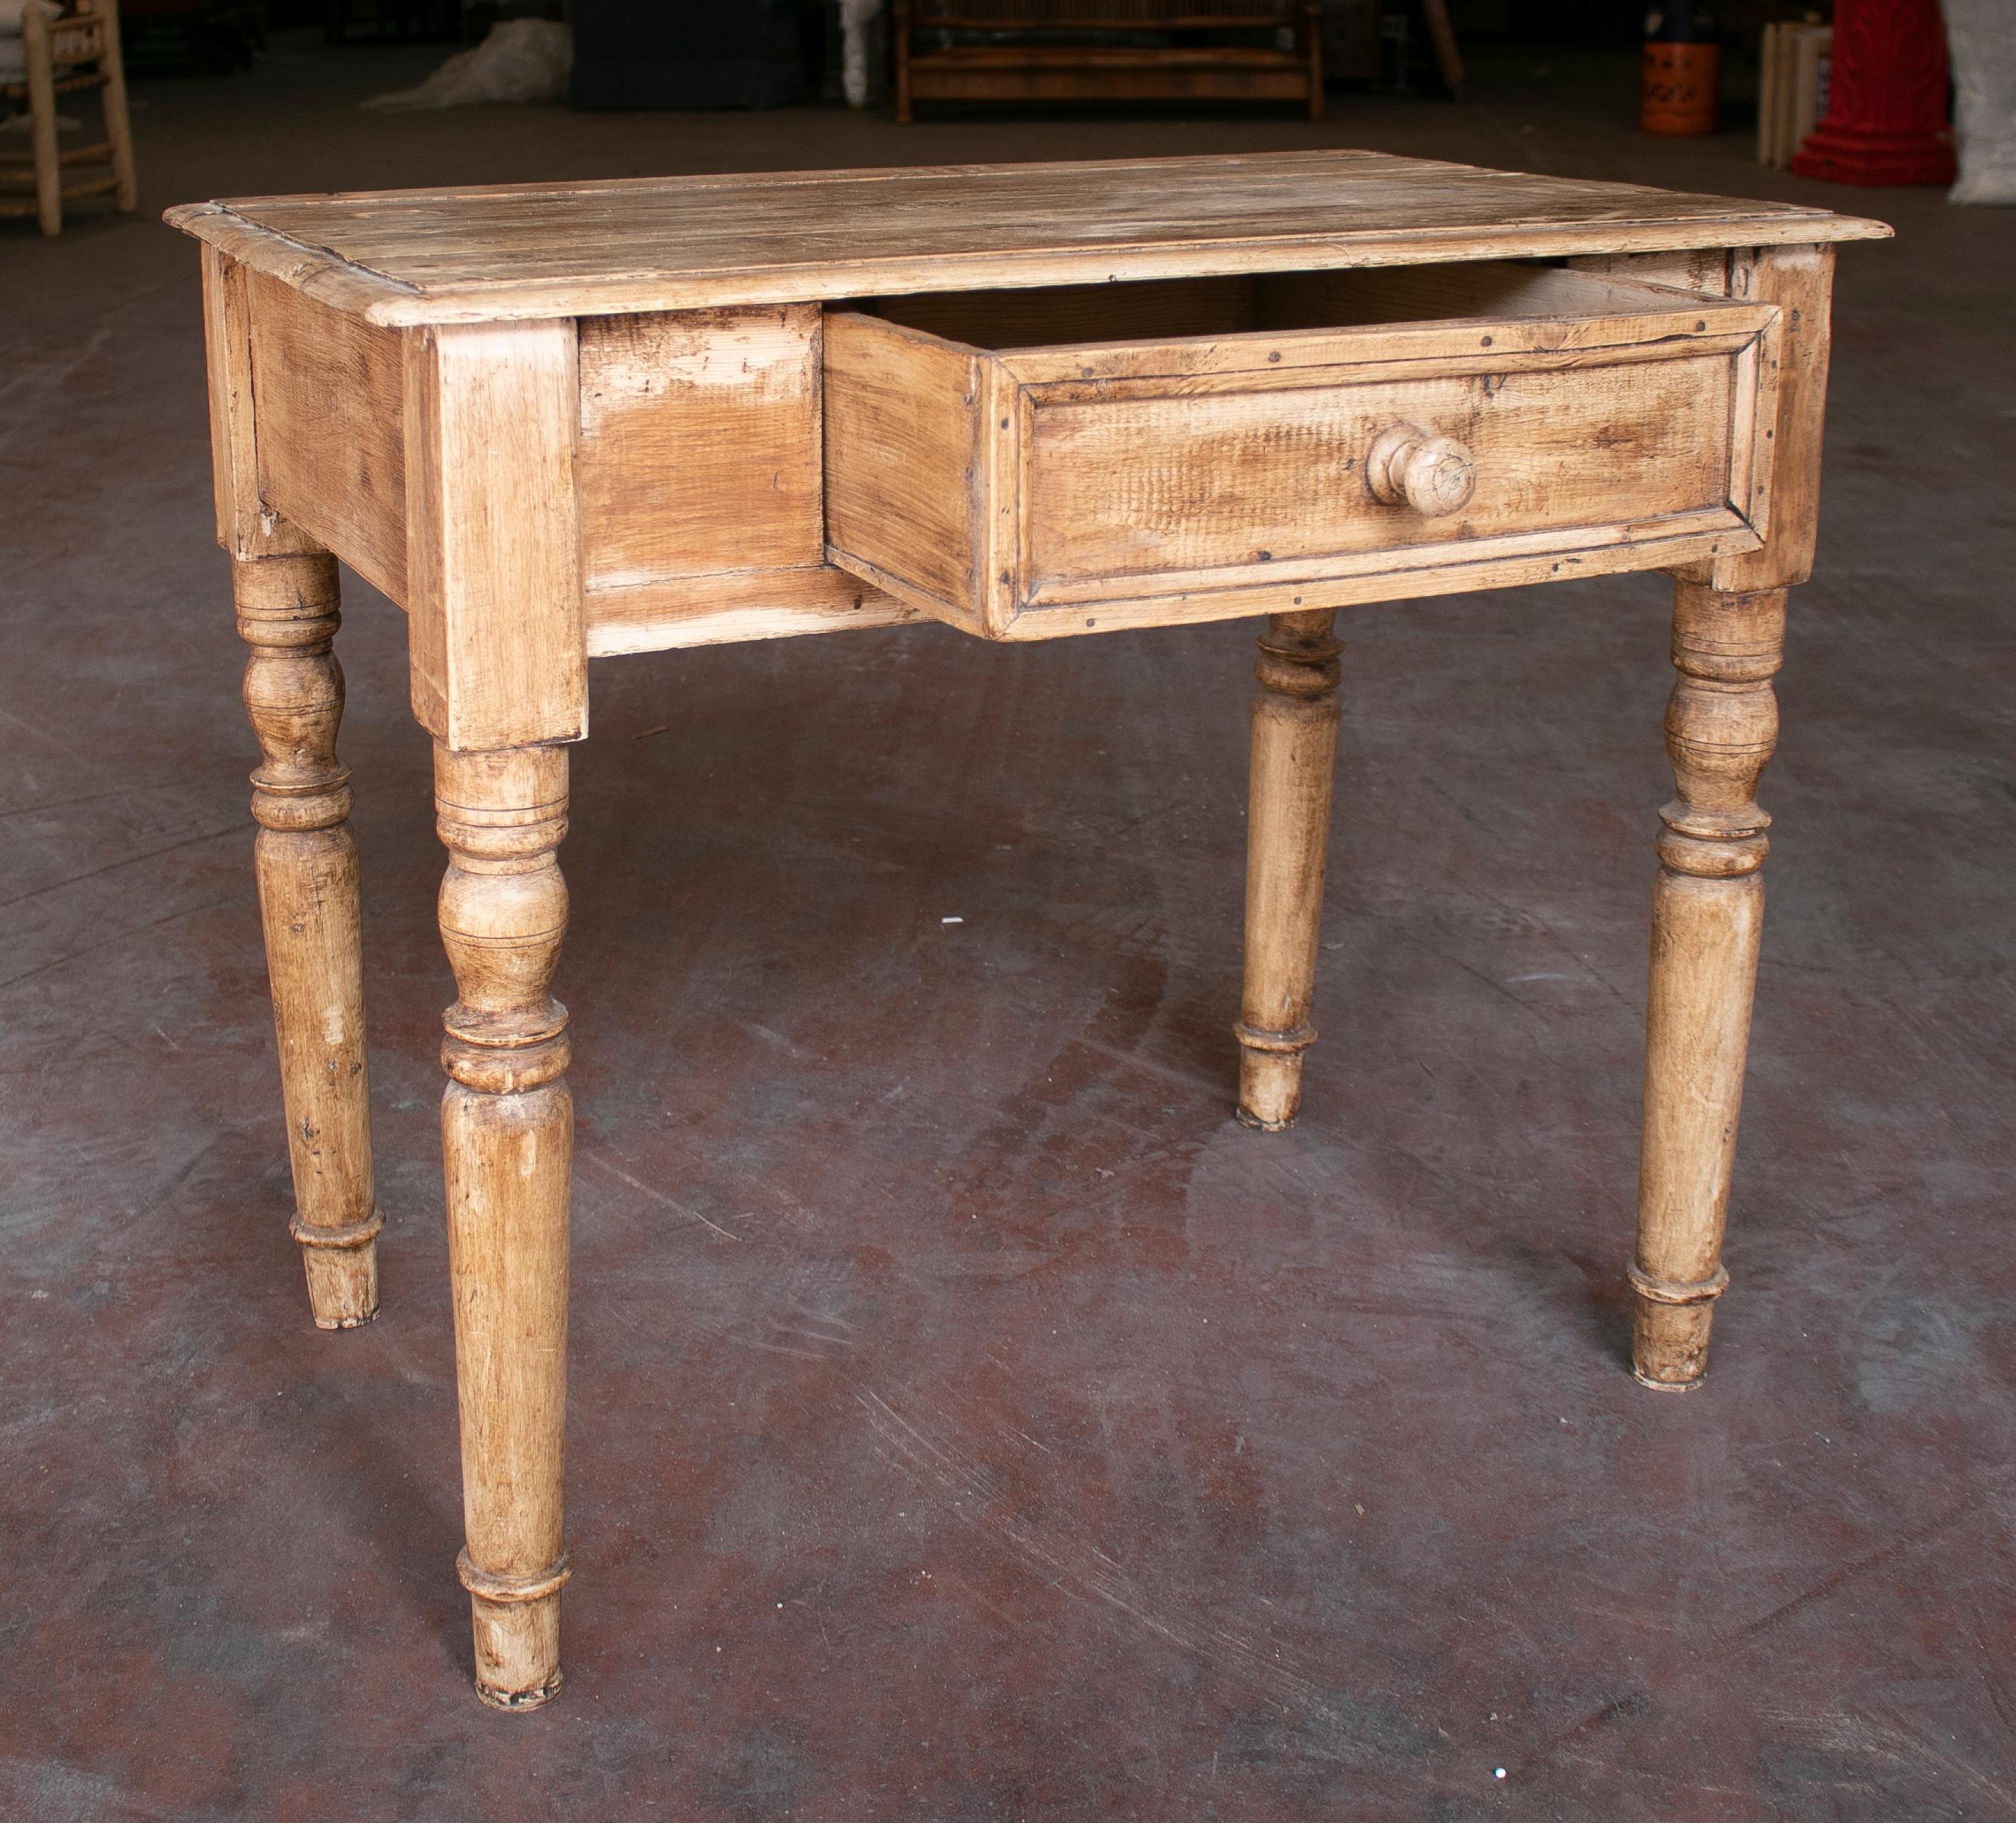 Antique 19th century Spanish one-drawer pinewood country table.